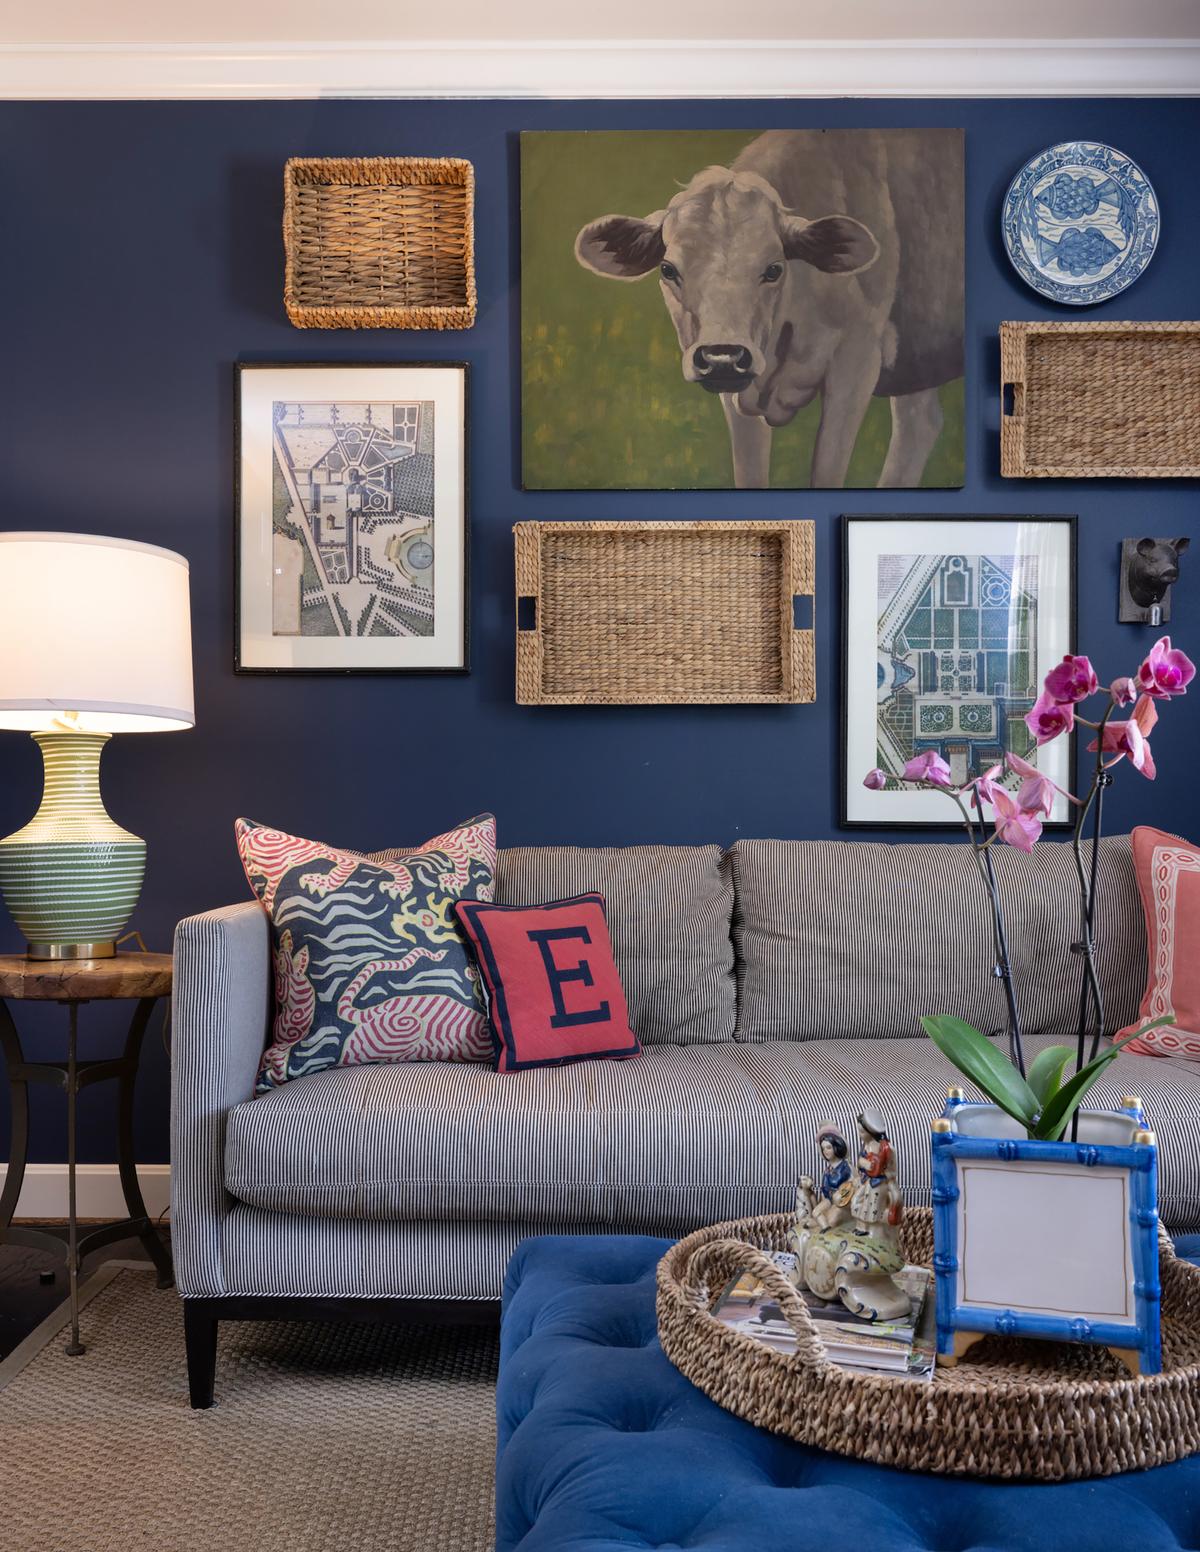 The sitting room's walls are dressed in a rich navy that complements the buttery velvet ottoman in the middle of the room and sets the tone for a bold and vibrant space that still brings an air of relaxation. (Handout/TNS)